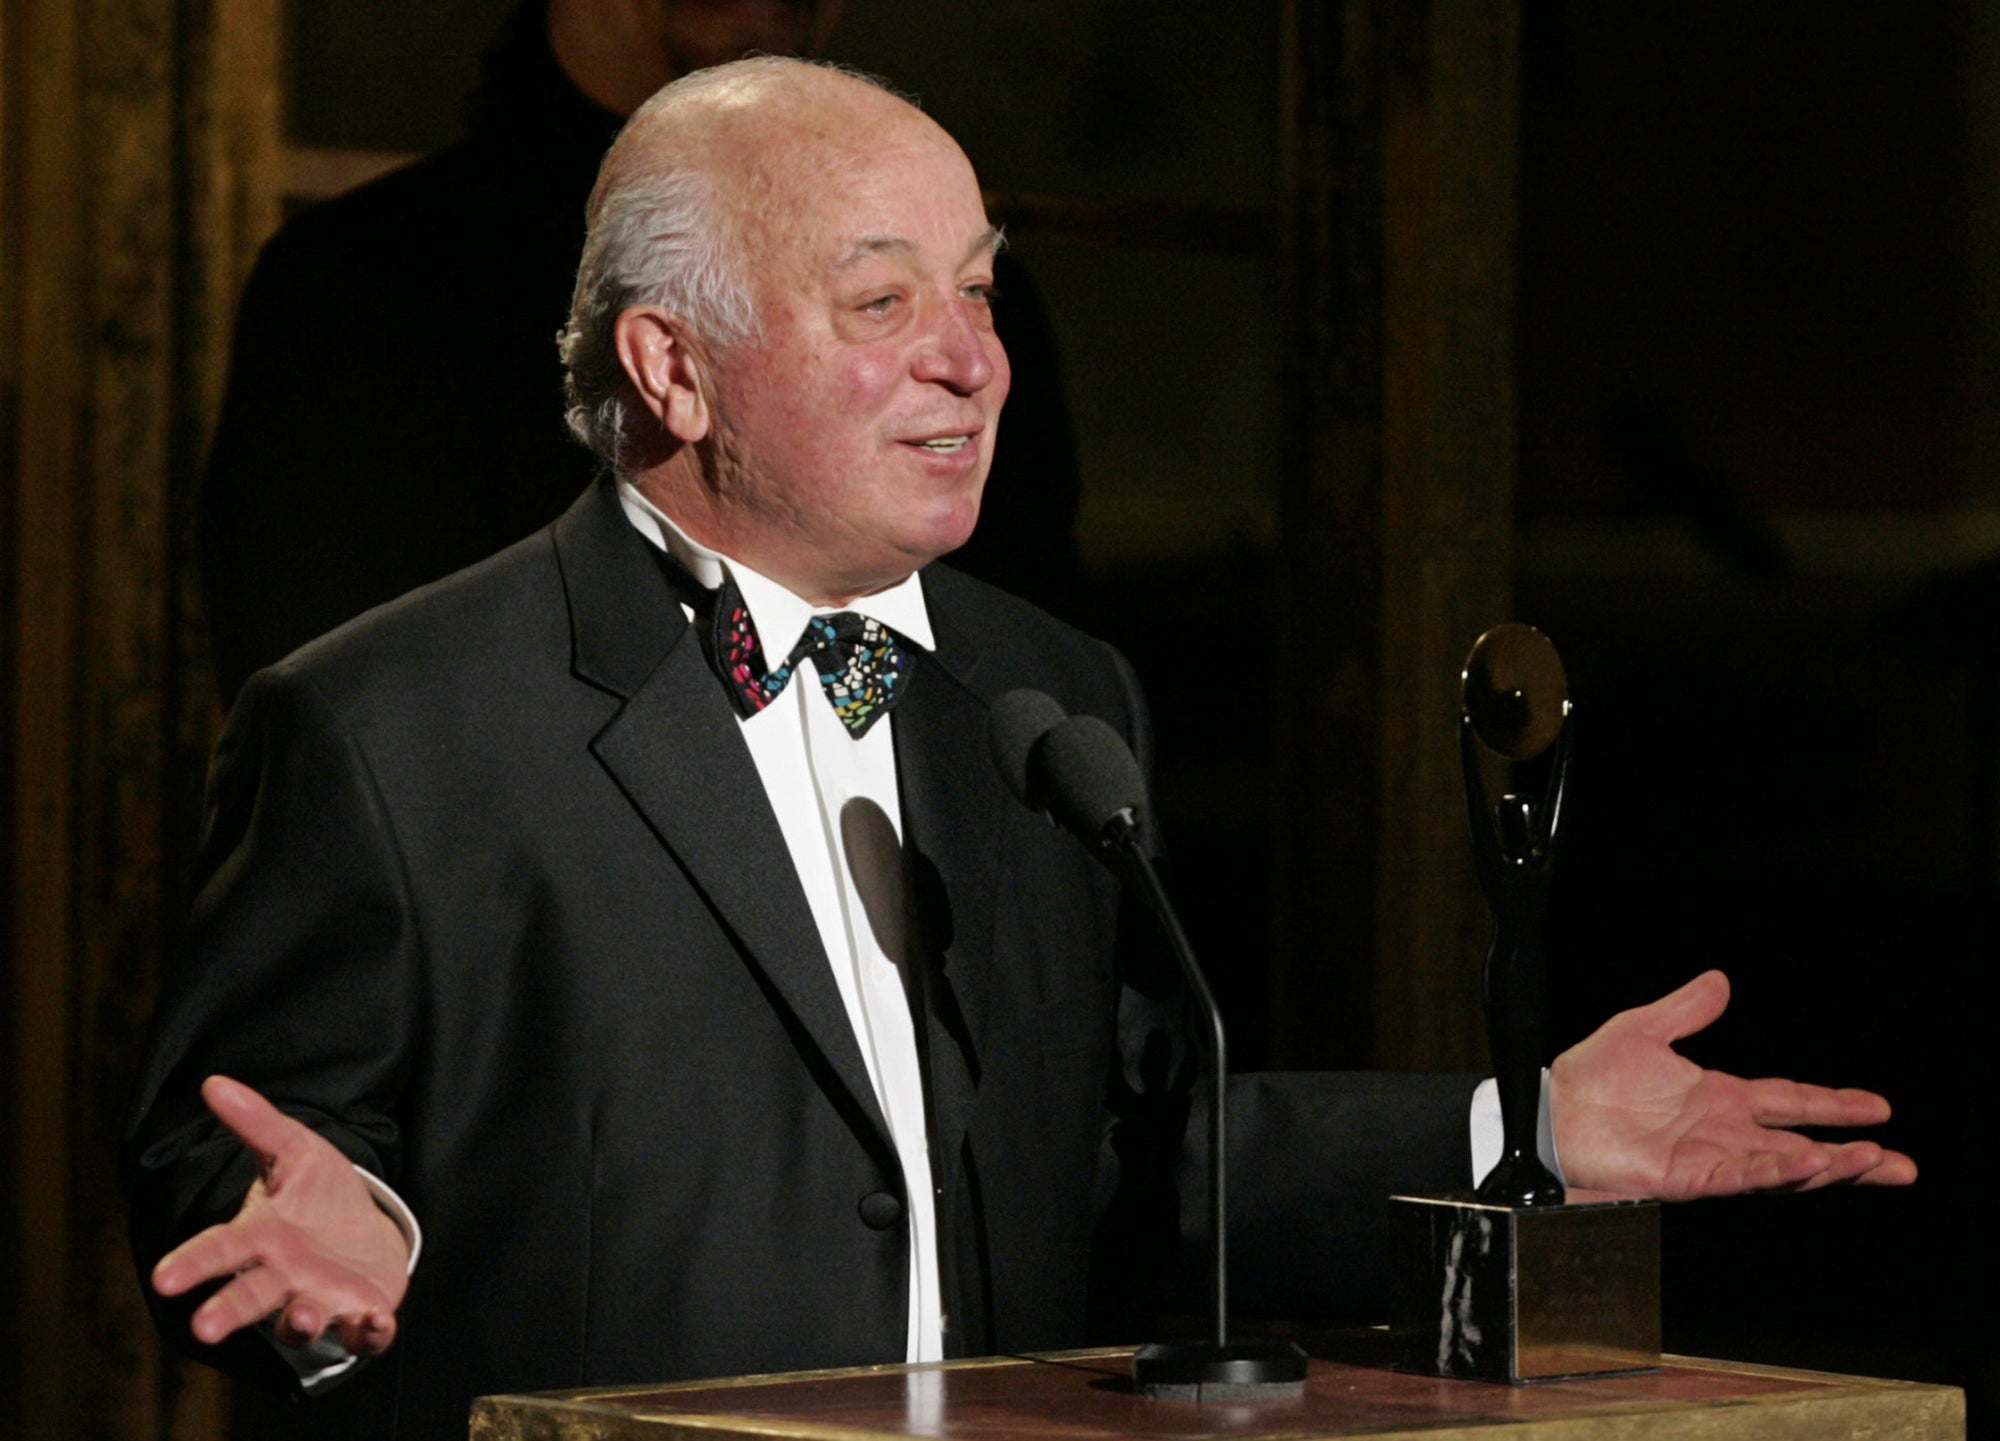 Seymour Stein died at the age of 80 on Sunday